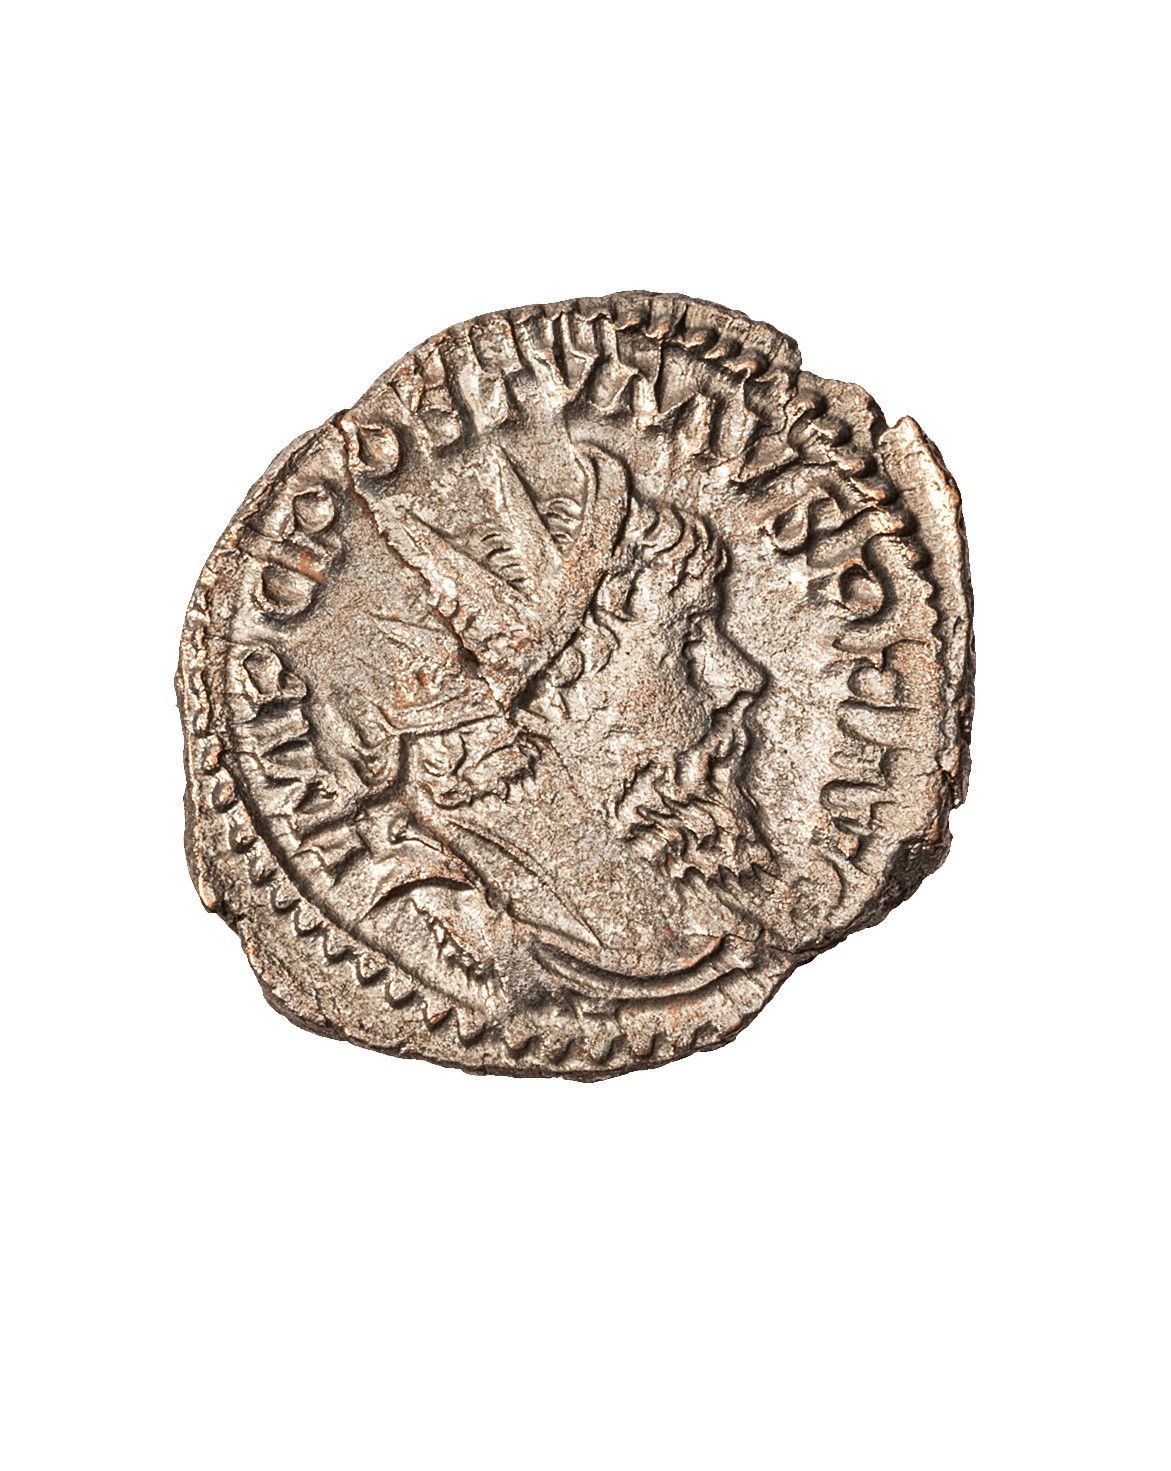 Null POSTUME 

Antoninian struck in Trier in 268

R/ Mace, bow and quiver 

Cune&hellip;